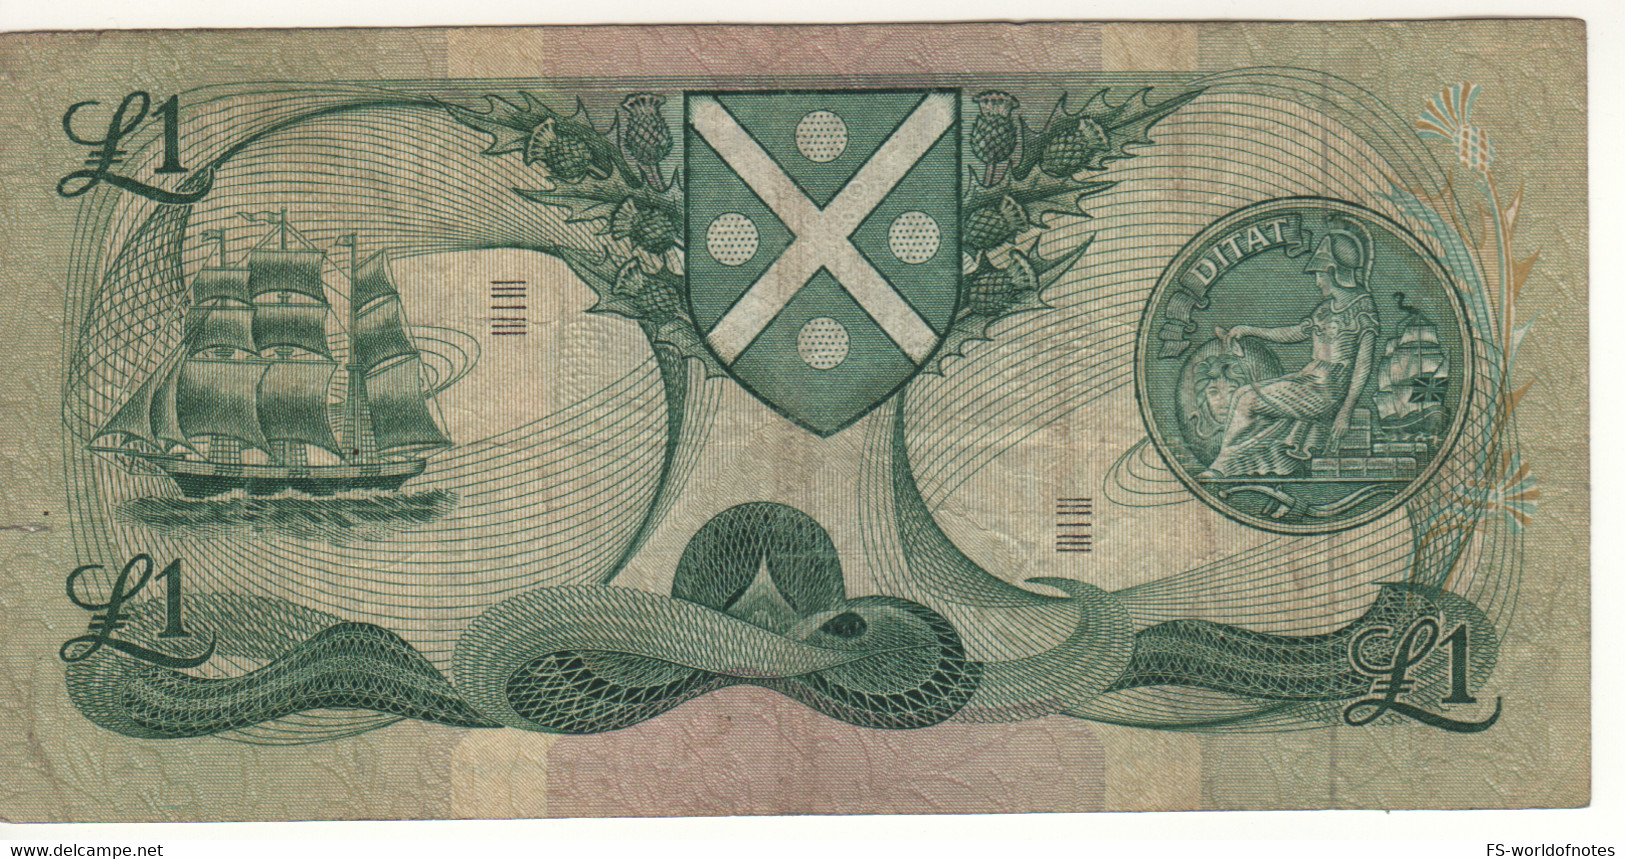 SCOTLAND  1 Pound    Bank Of Scotland  P111a   Dated 10th August, 1970  (Sir. Walter Scott+sailing Ship On Back) - 1 Pound